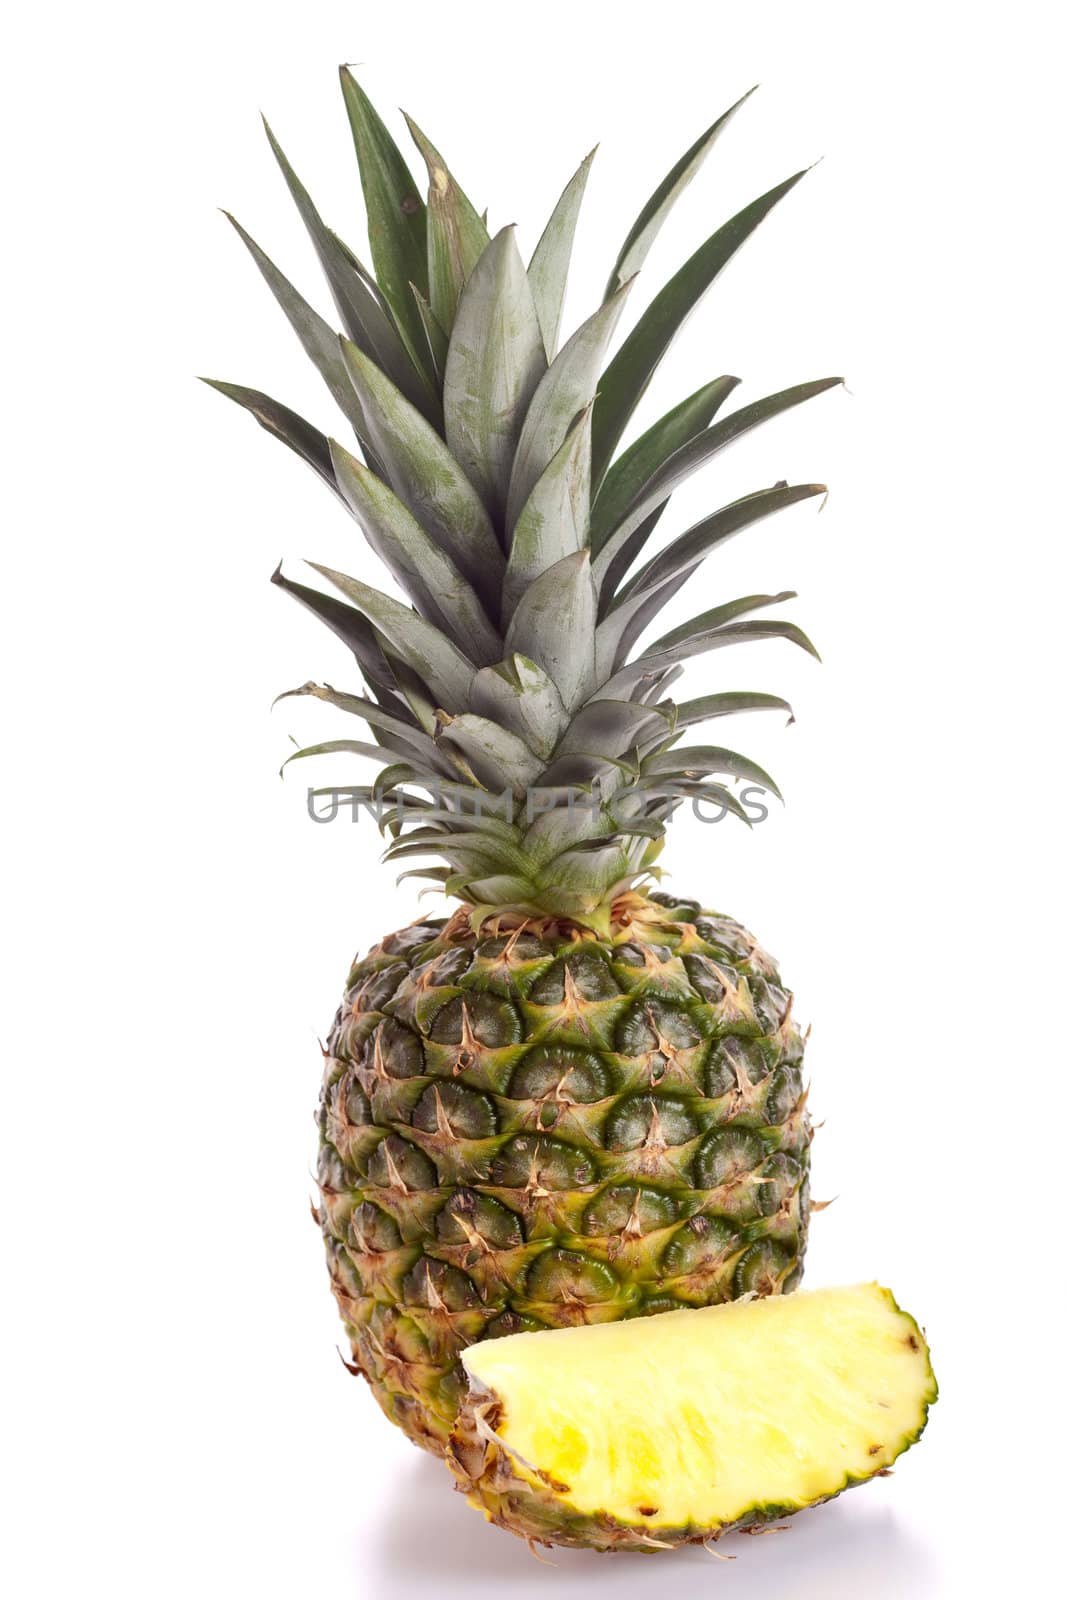 Pineapple with slice in front on white background